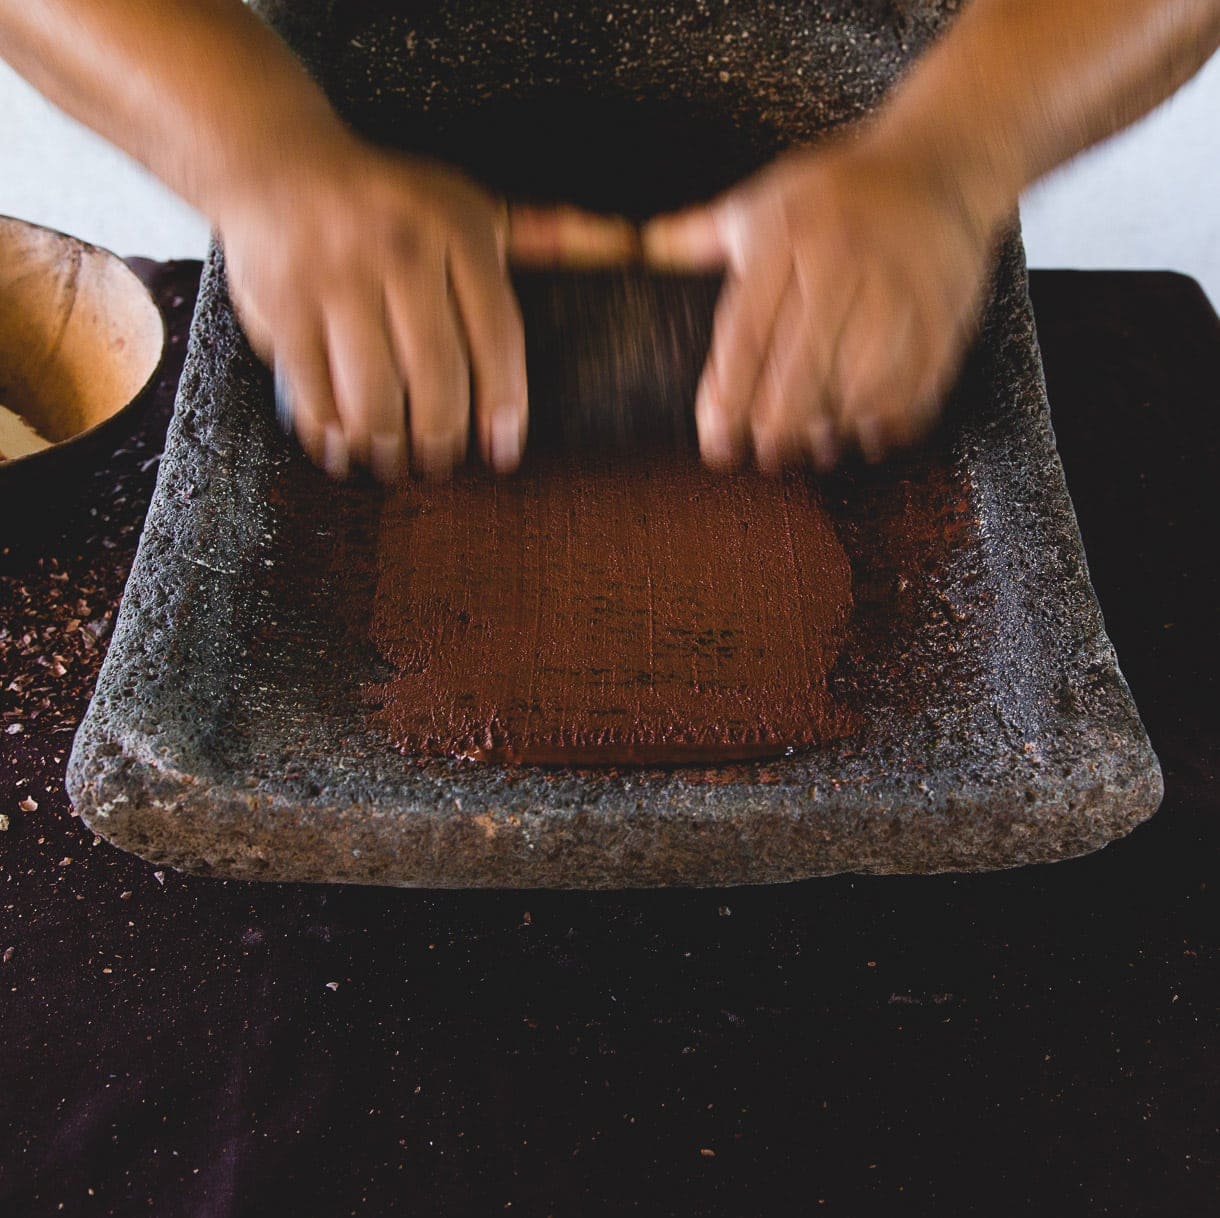 Making Chocolate from Bean to Bar - Ixcacao Chocolate